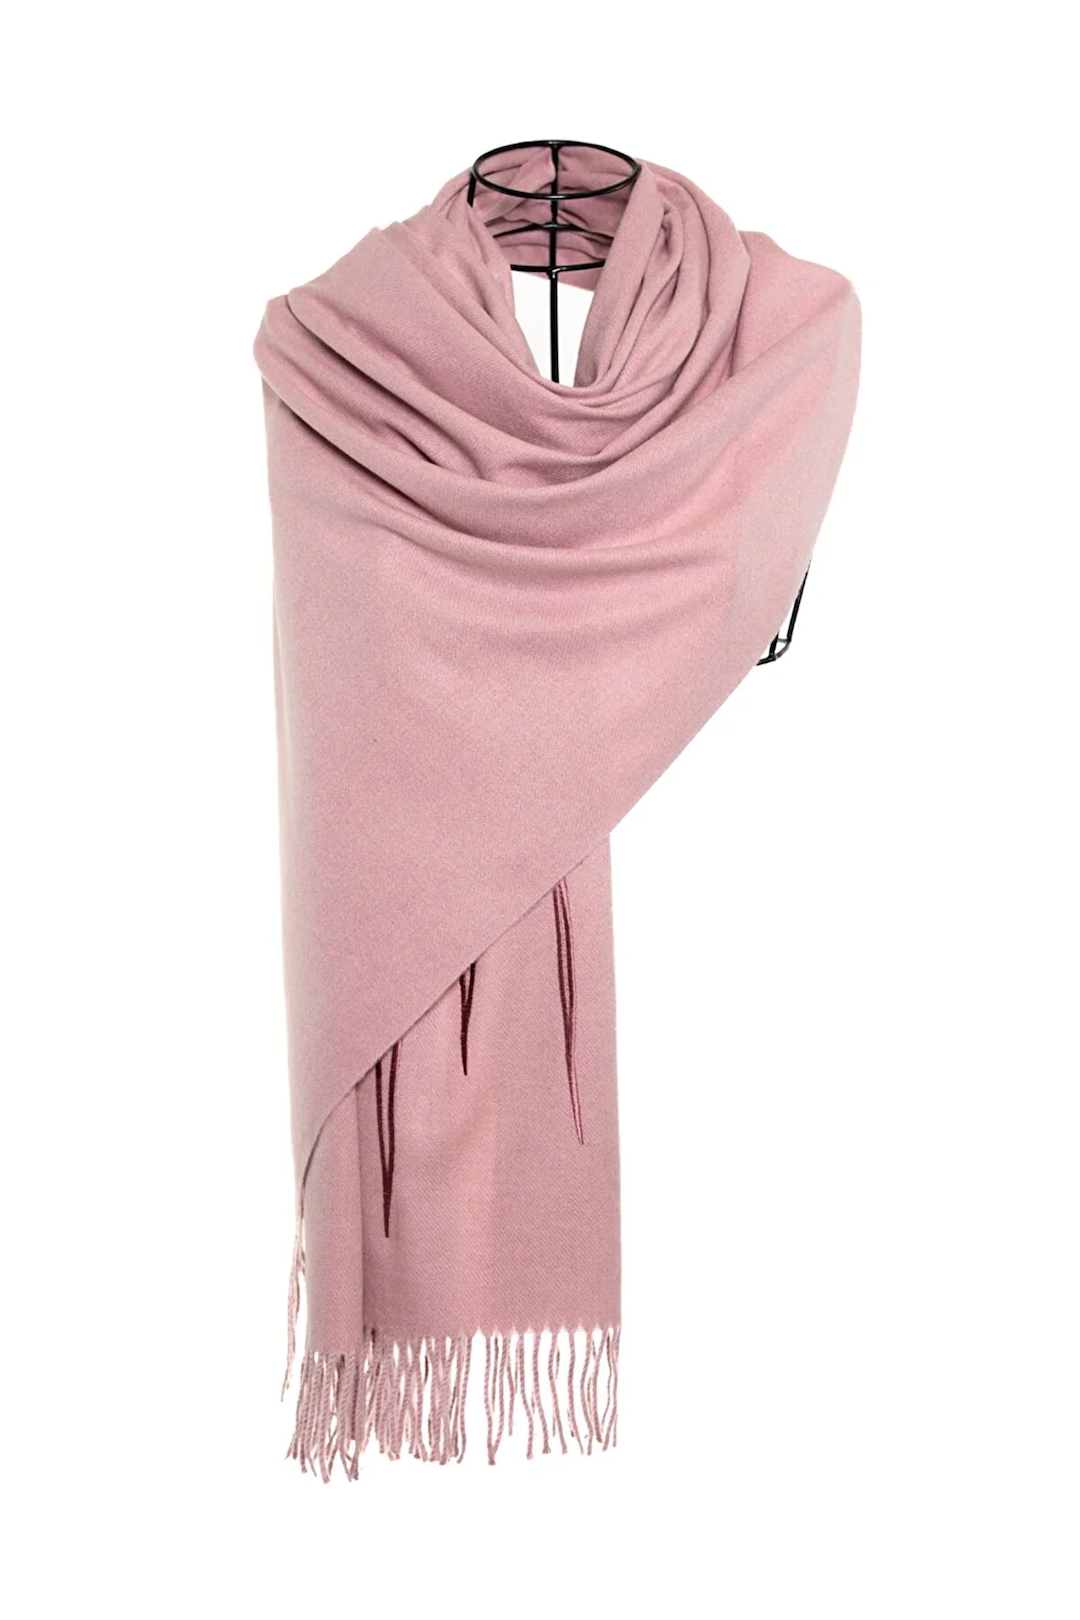 Heart Beat Embroidered Shawl with Faux Fur Pon Pons - Pink